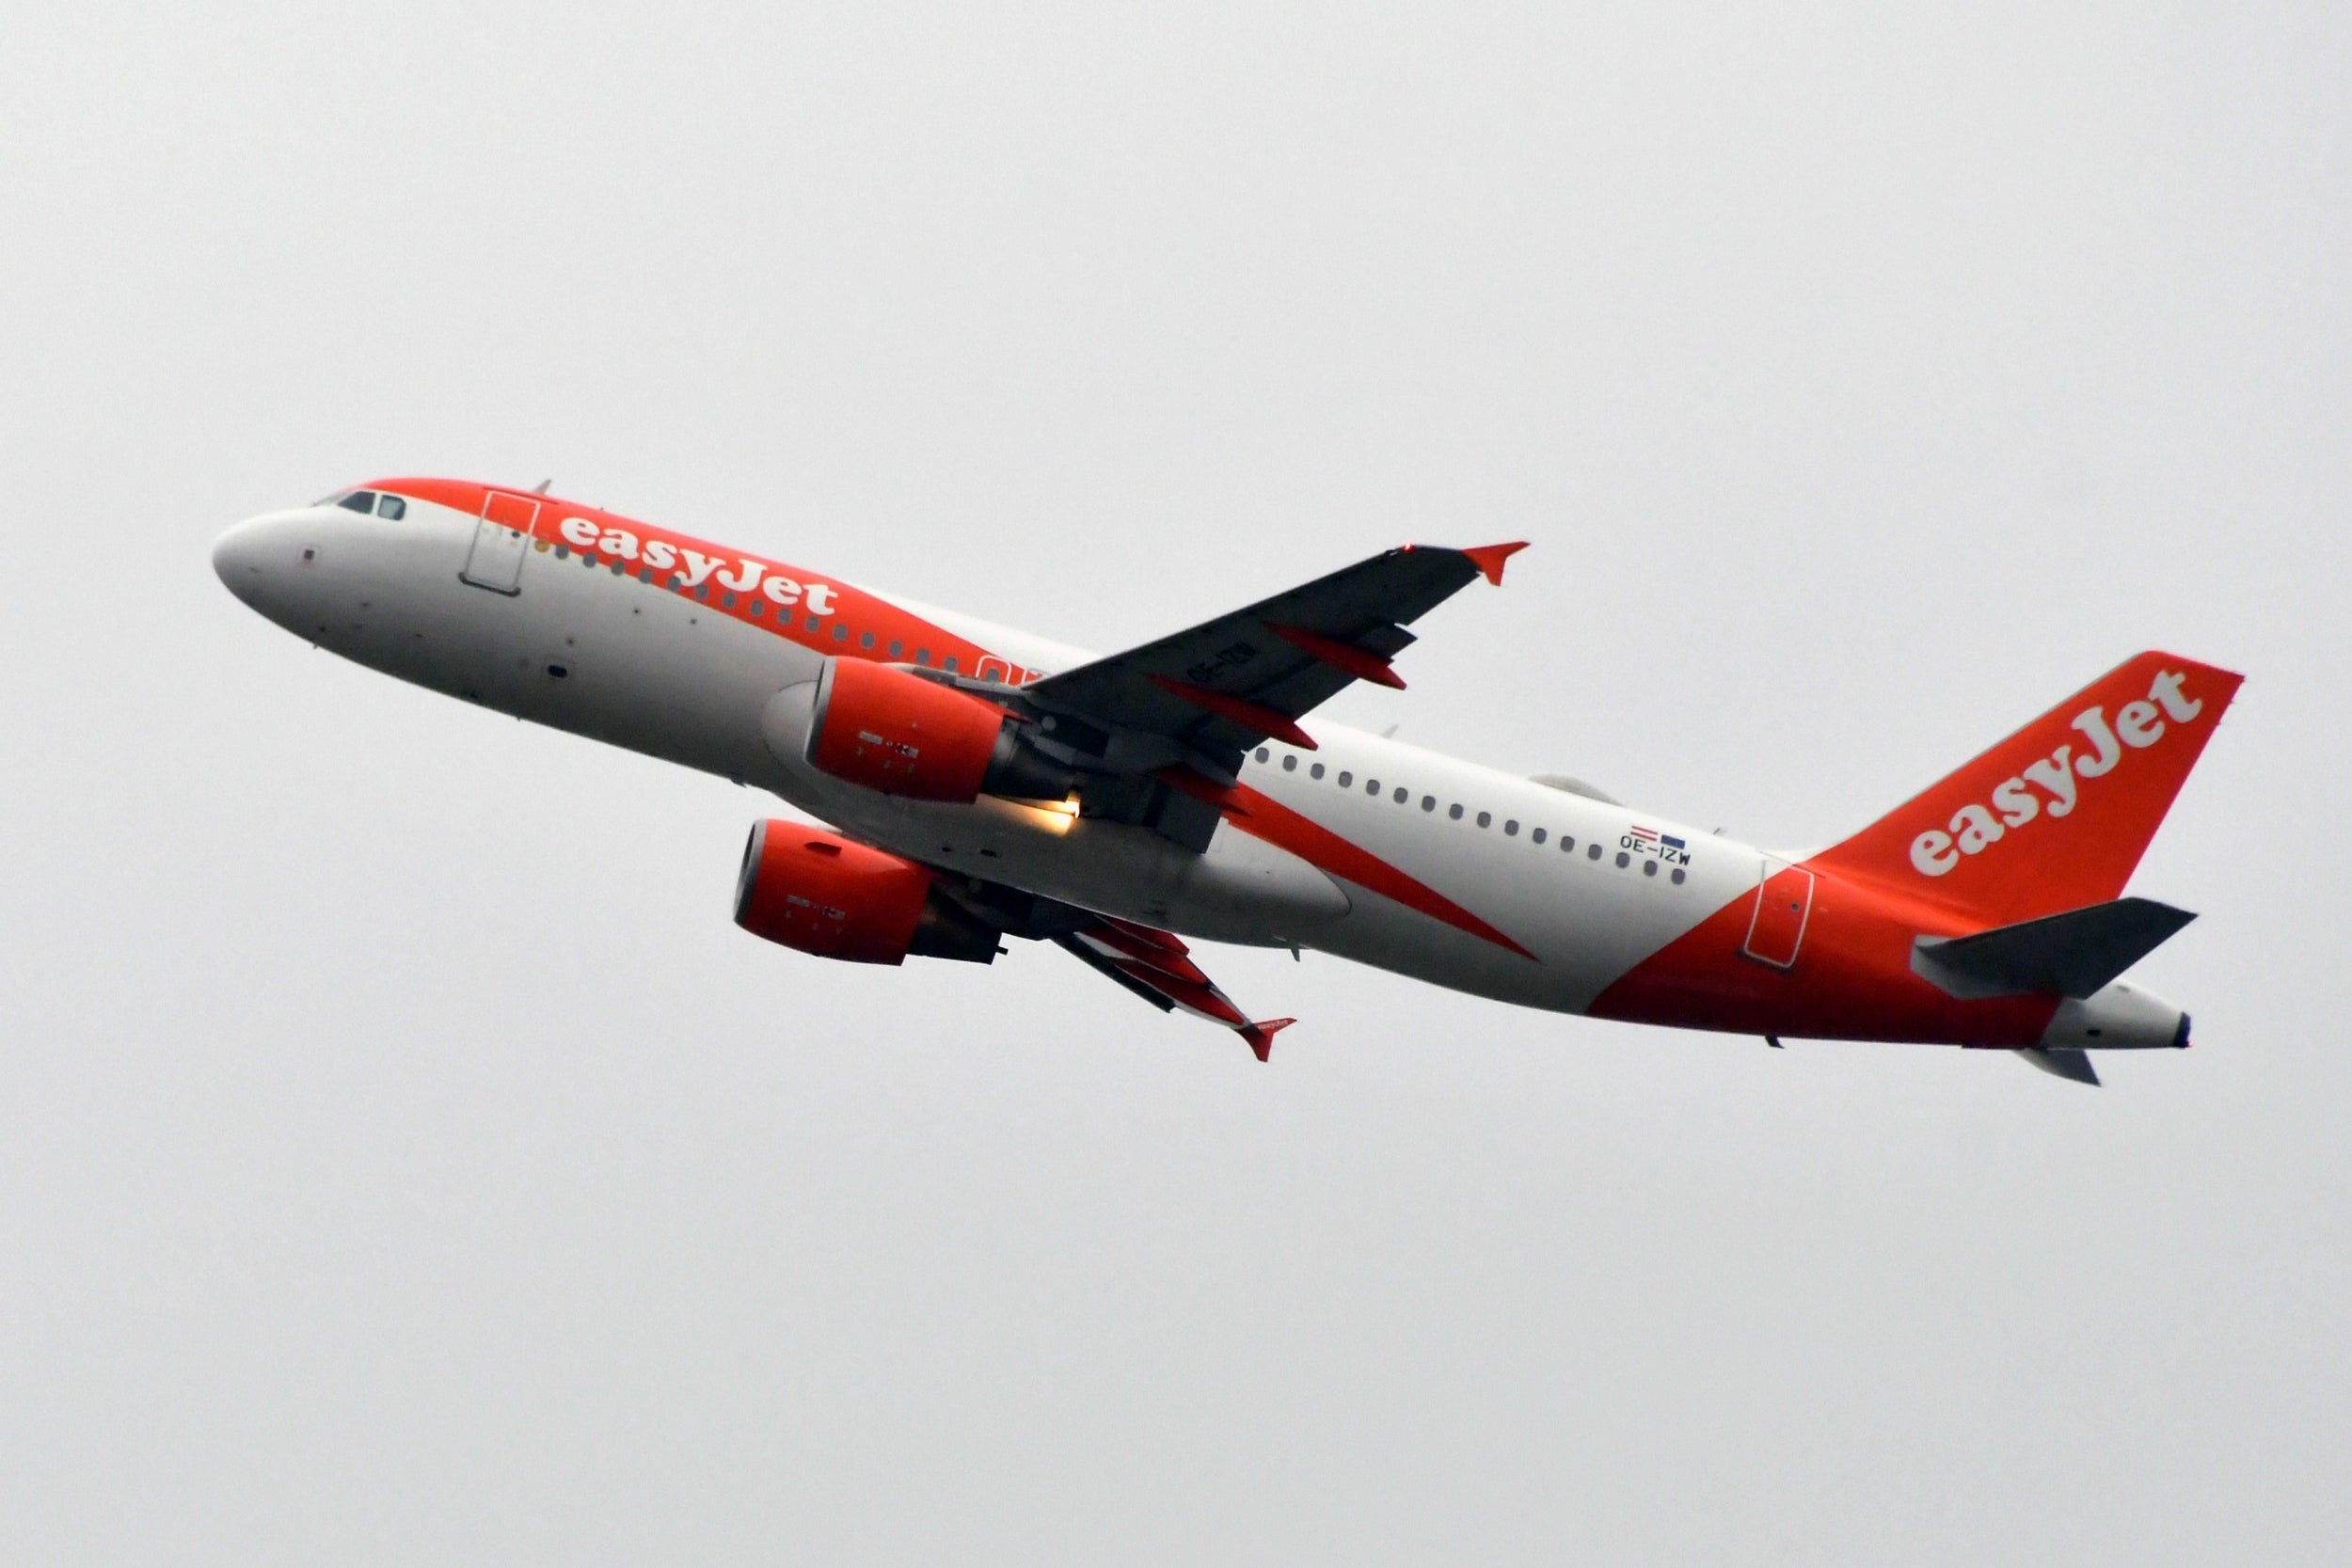 A passenger has died onboard an easyJet flight to the UK